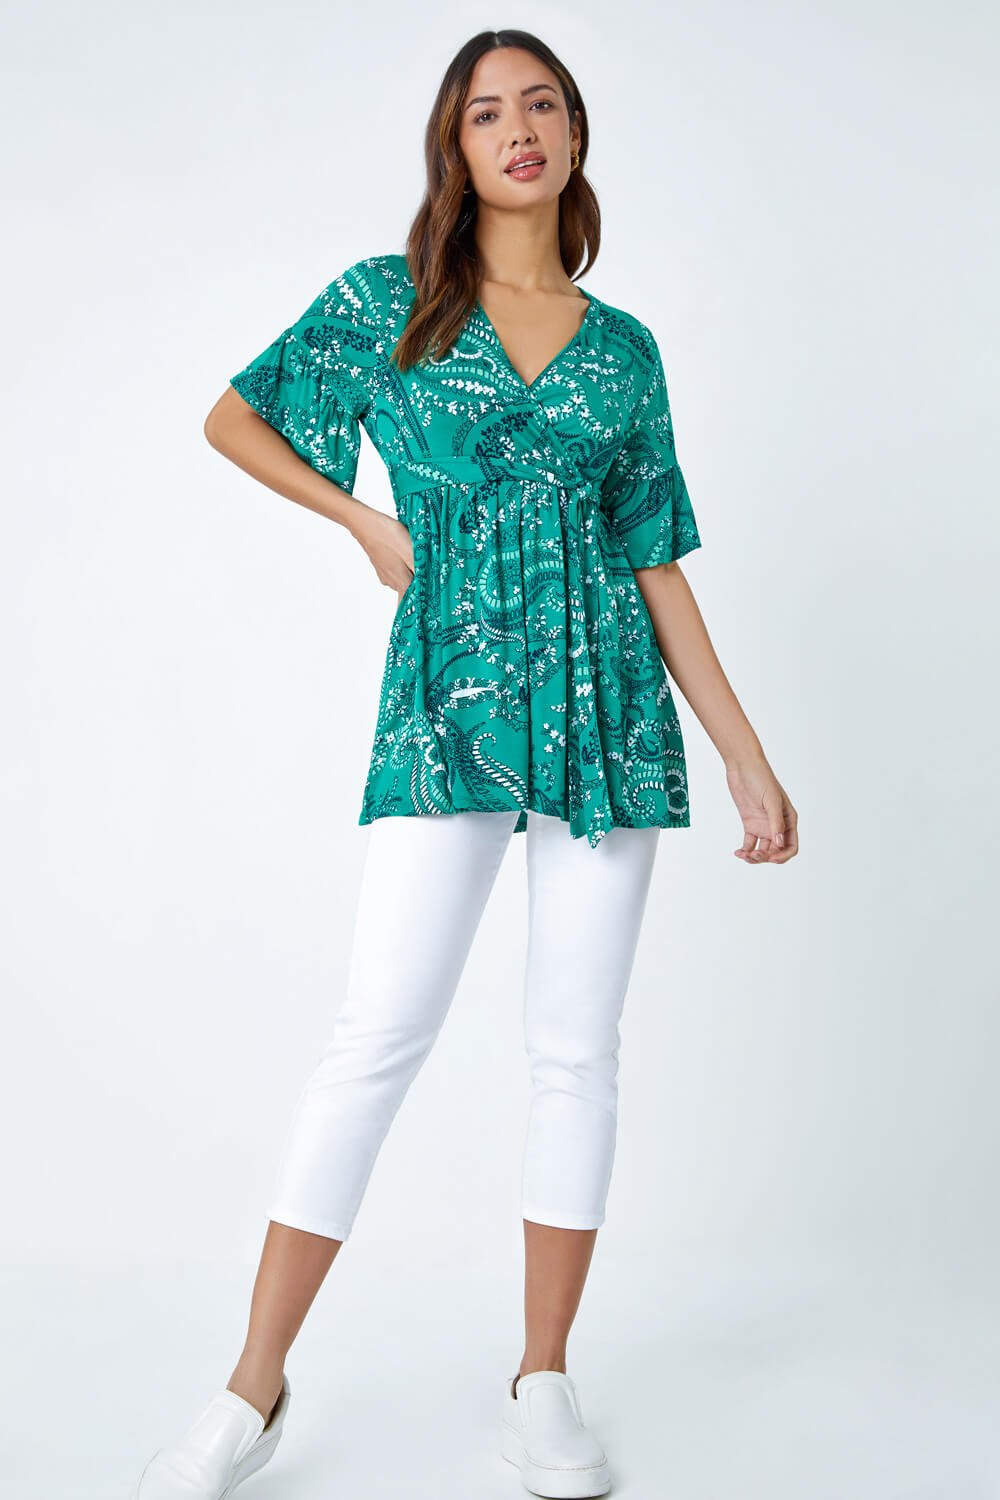 Green Paisley Print Stretch Jersey Wrap Top, Image 2 of 5